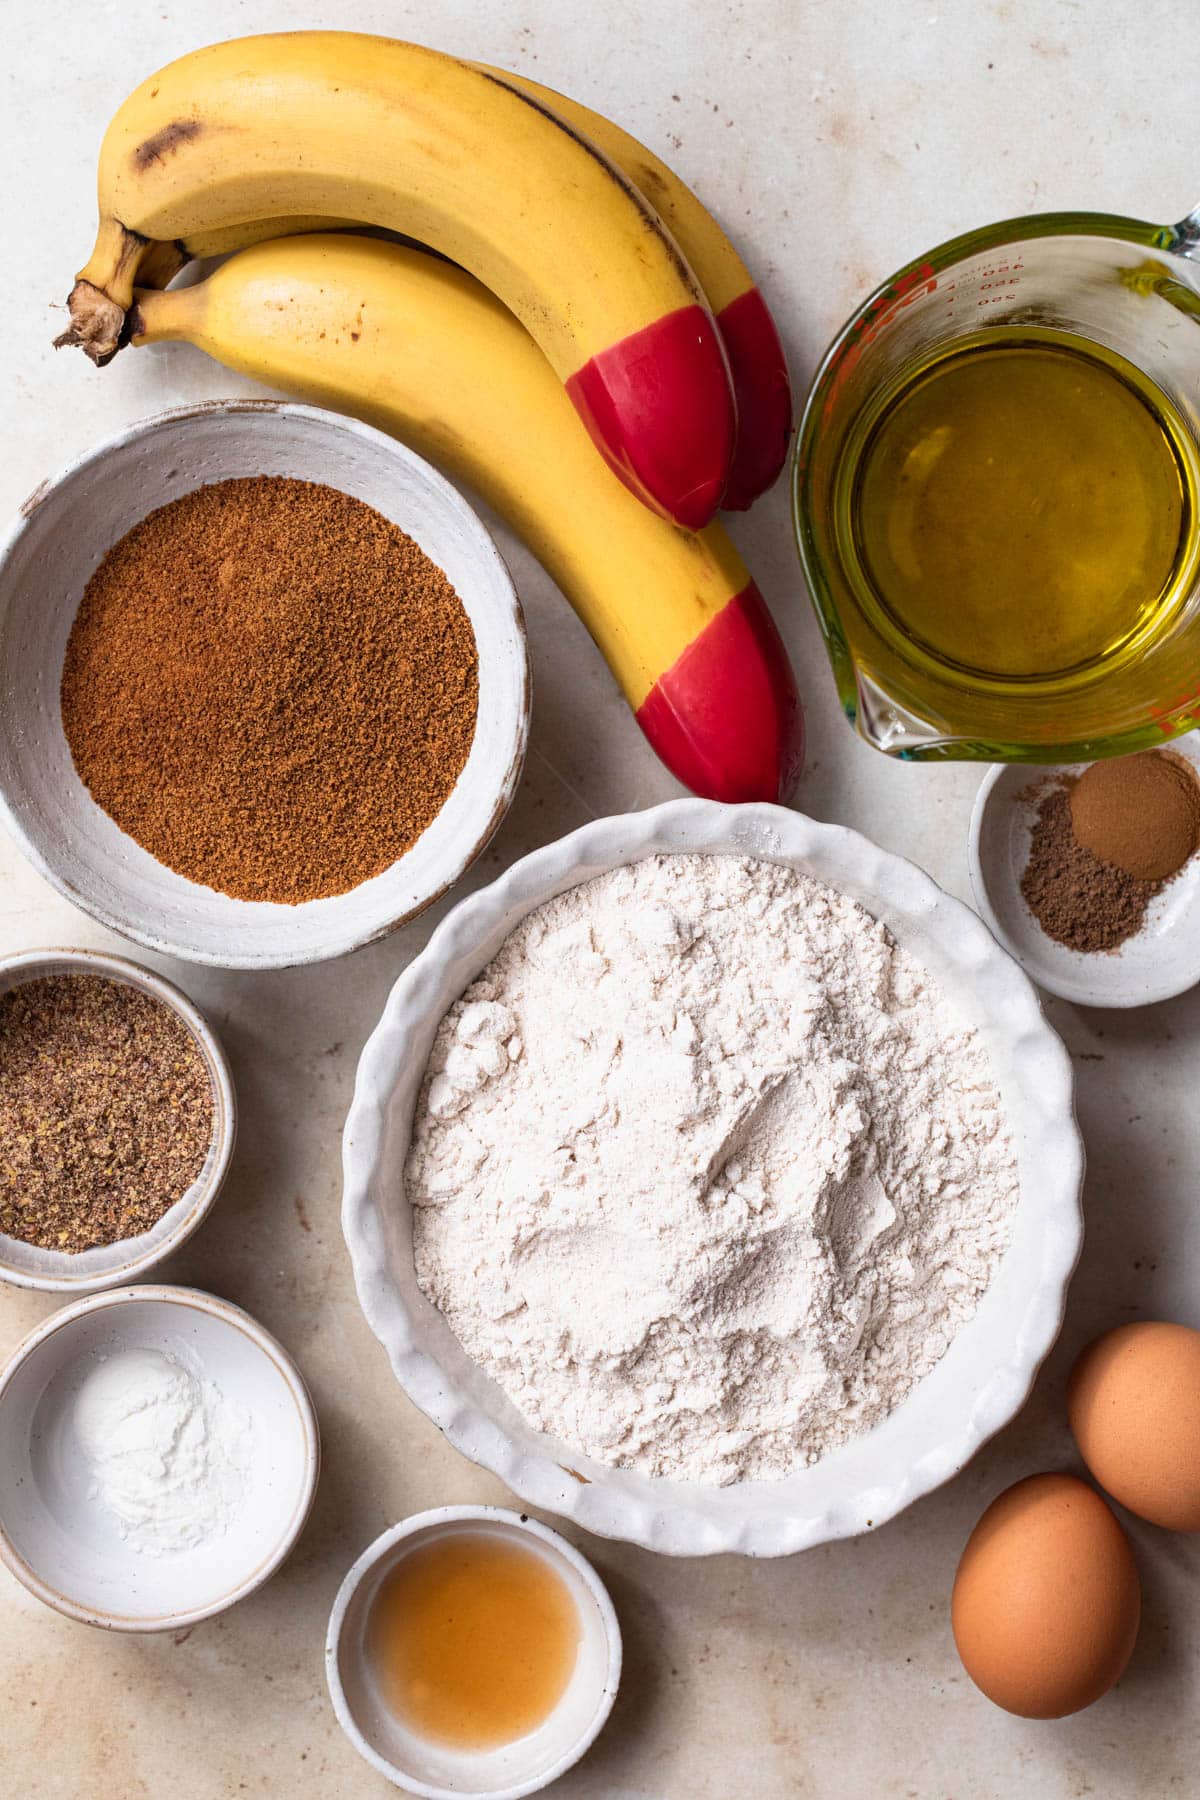 All ingredients needed to make gluten free banana muffins laid out in individual bowls.